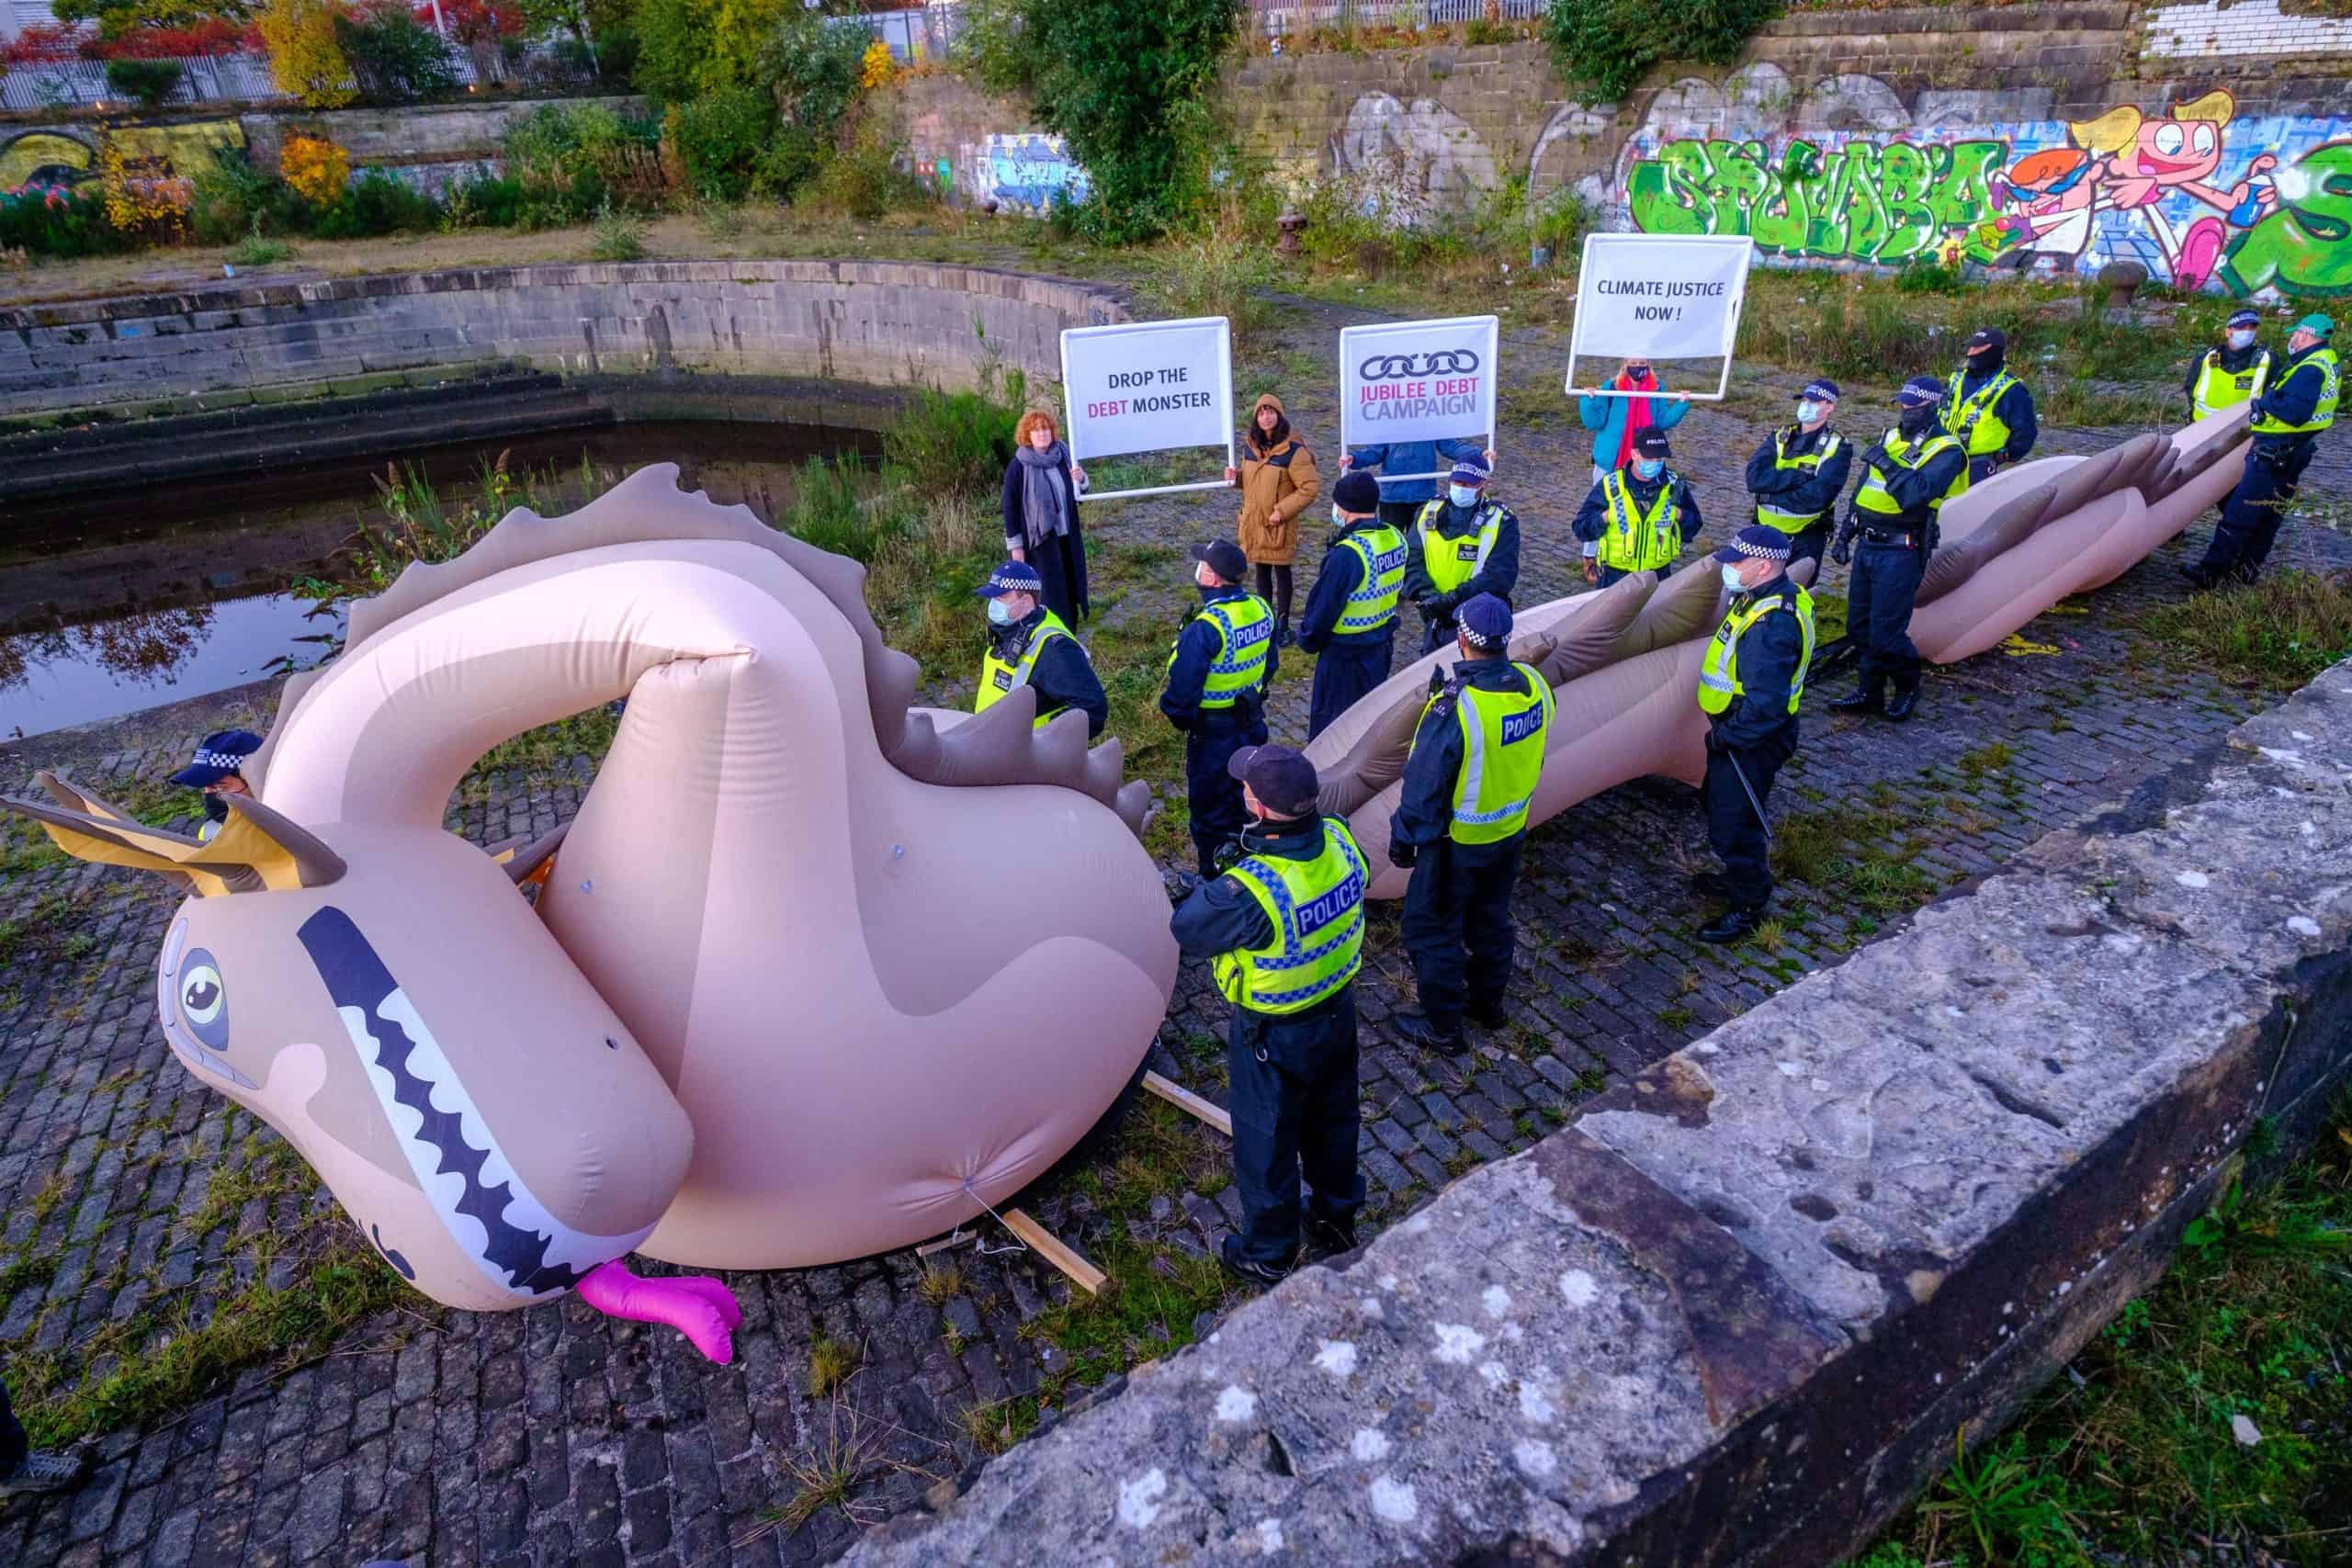 Loch-ed up monster: Inflatable Nessie ‘seized’ by police at Cop26